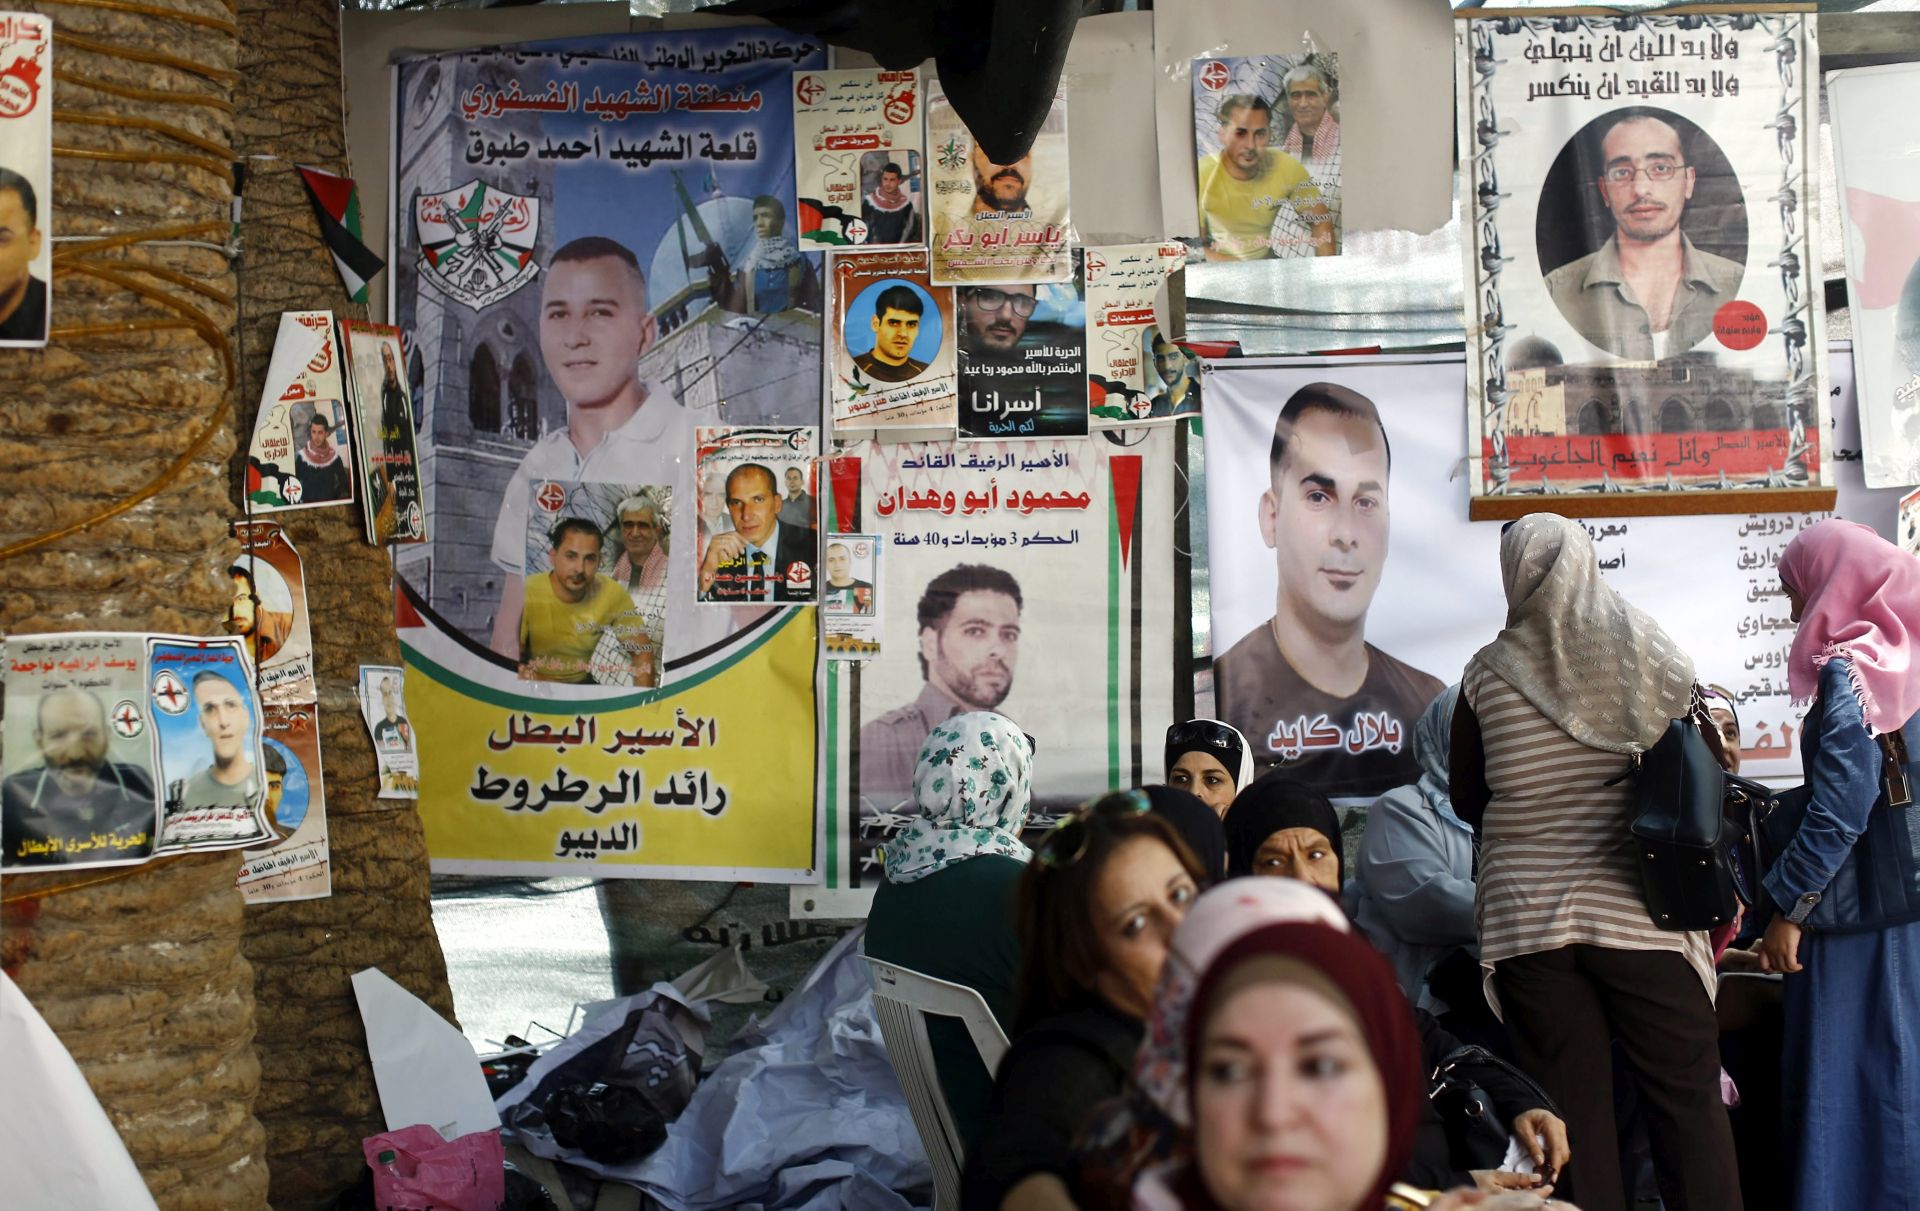 epa05453007 Palestinians sit inside a protest tent demanding the release of Palestinian prisoners who are on hunger strike in Israeli jails, in the West Bank city of Nablus, 03 August 2016. Palestinian prisoners in Israeli jails went on hunger strike in solidarity with Bilal Kayed, a member of Popular front for liberation of Palestine (PFLP) who started his hunger strike on 15 June 2016. after being more than 14 years imprisoned in Israeli jails. Kayed, one of 750 fellow Palestinians held in administrative detention without charge or trial, was put under administrative detention after having served a 14.5-years sentence in prison  EPA/ALAA BADARNEH